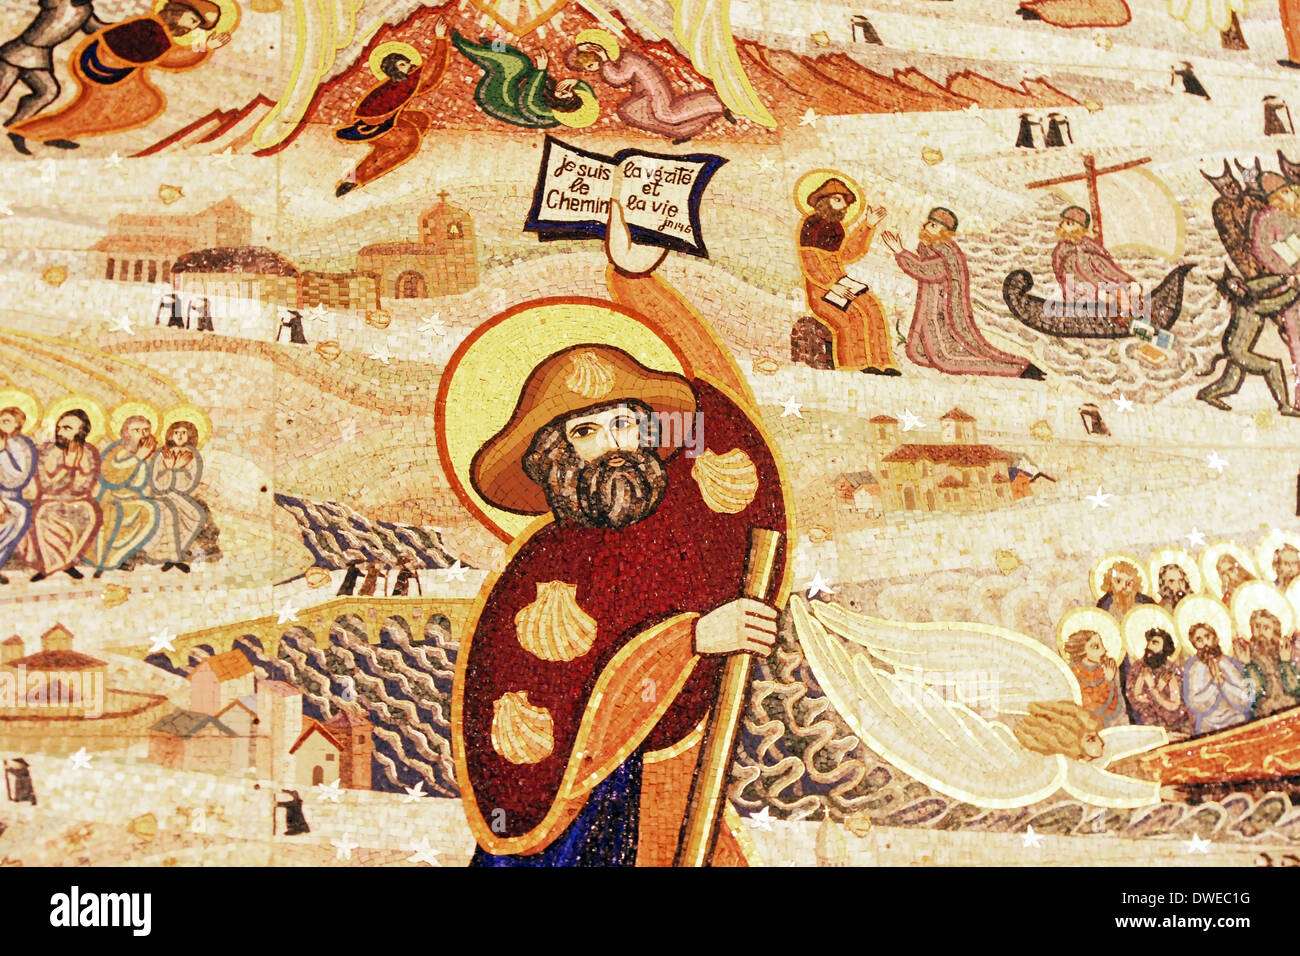 Old Christian mosaic with Mosus and the 10 commandments Stock Photo